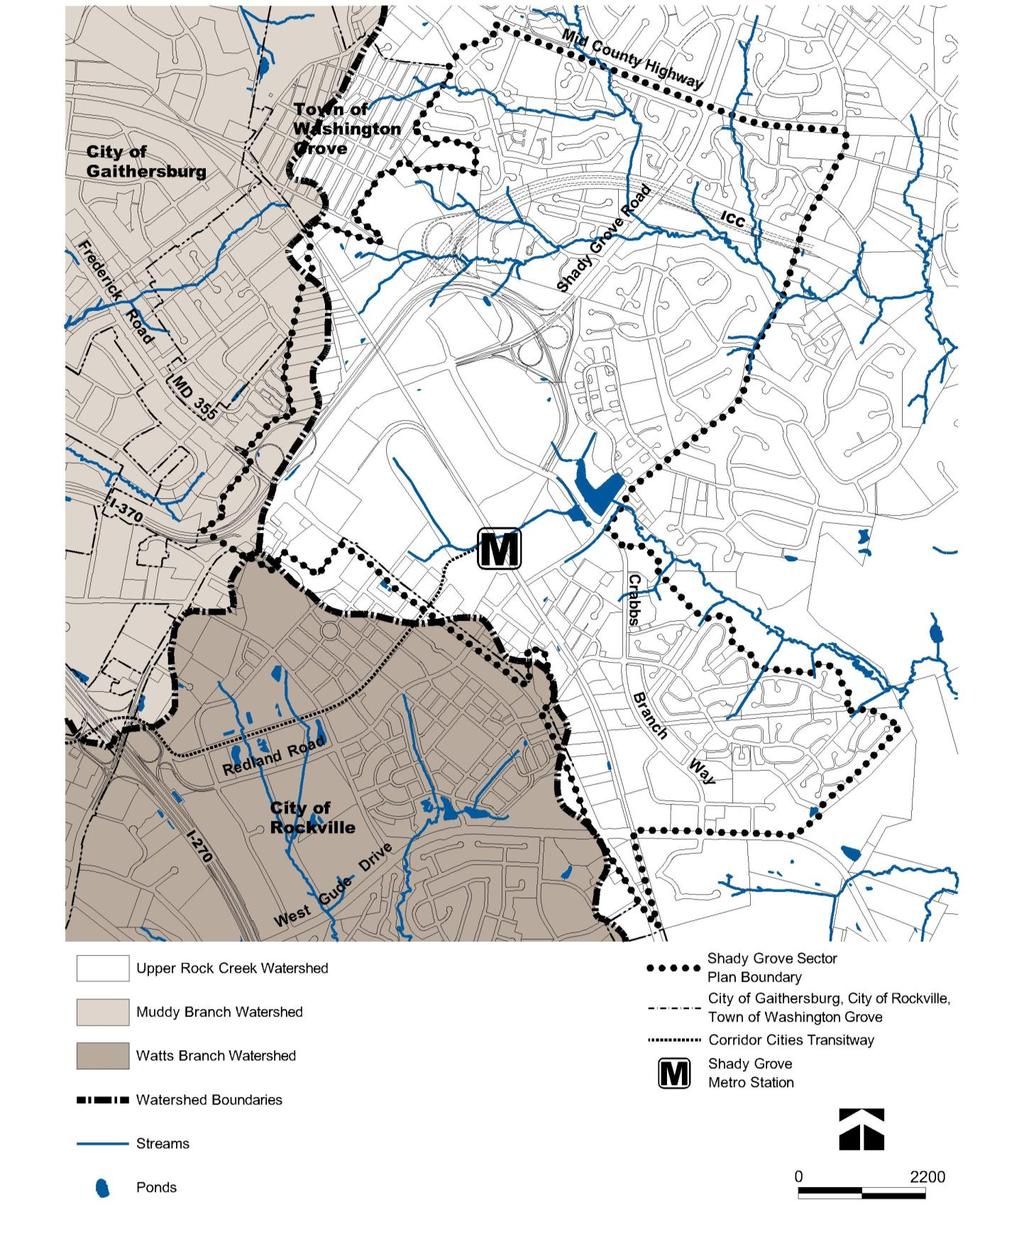 Watersheds Approved and